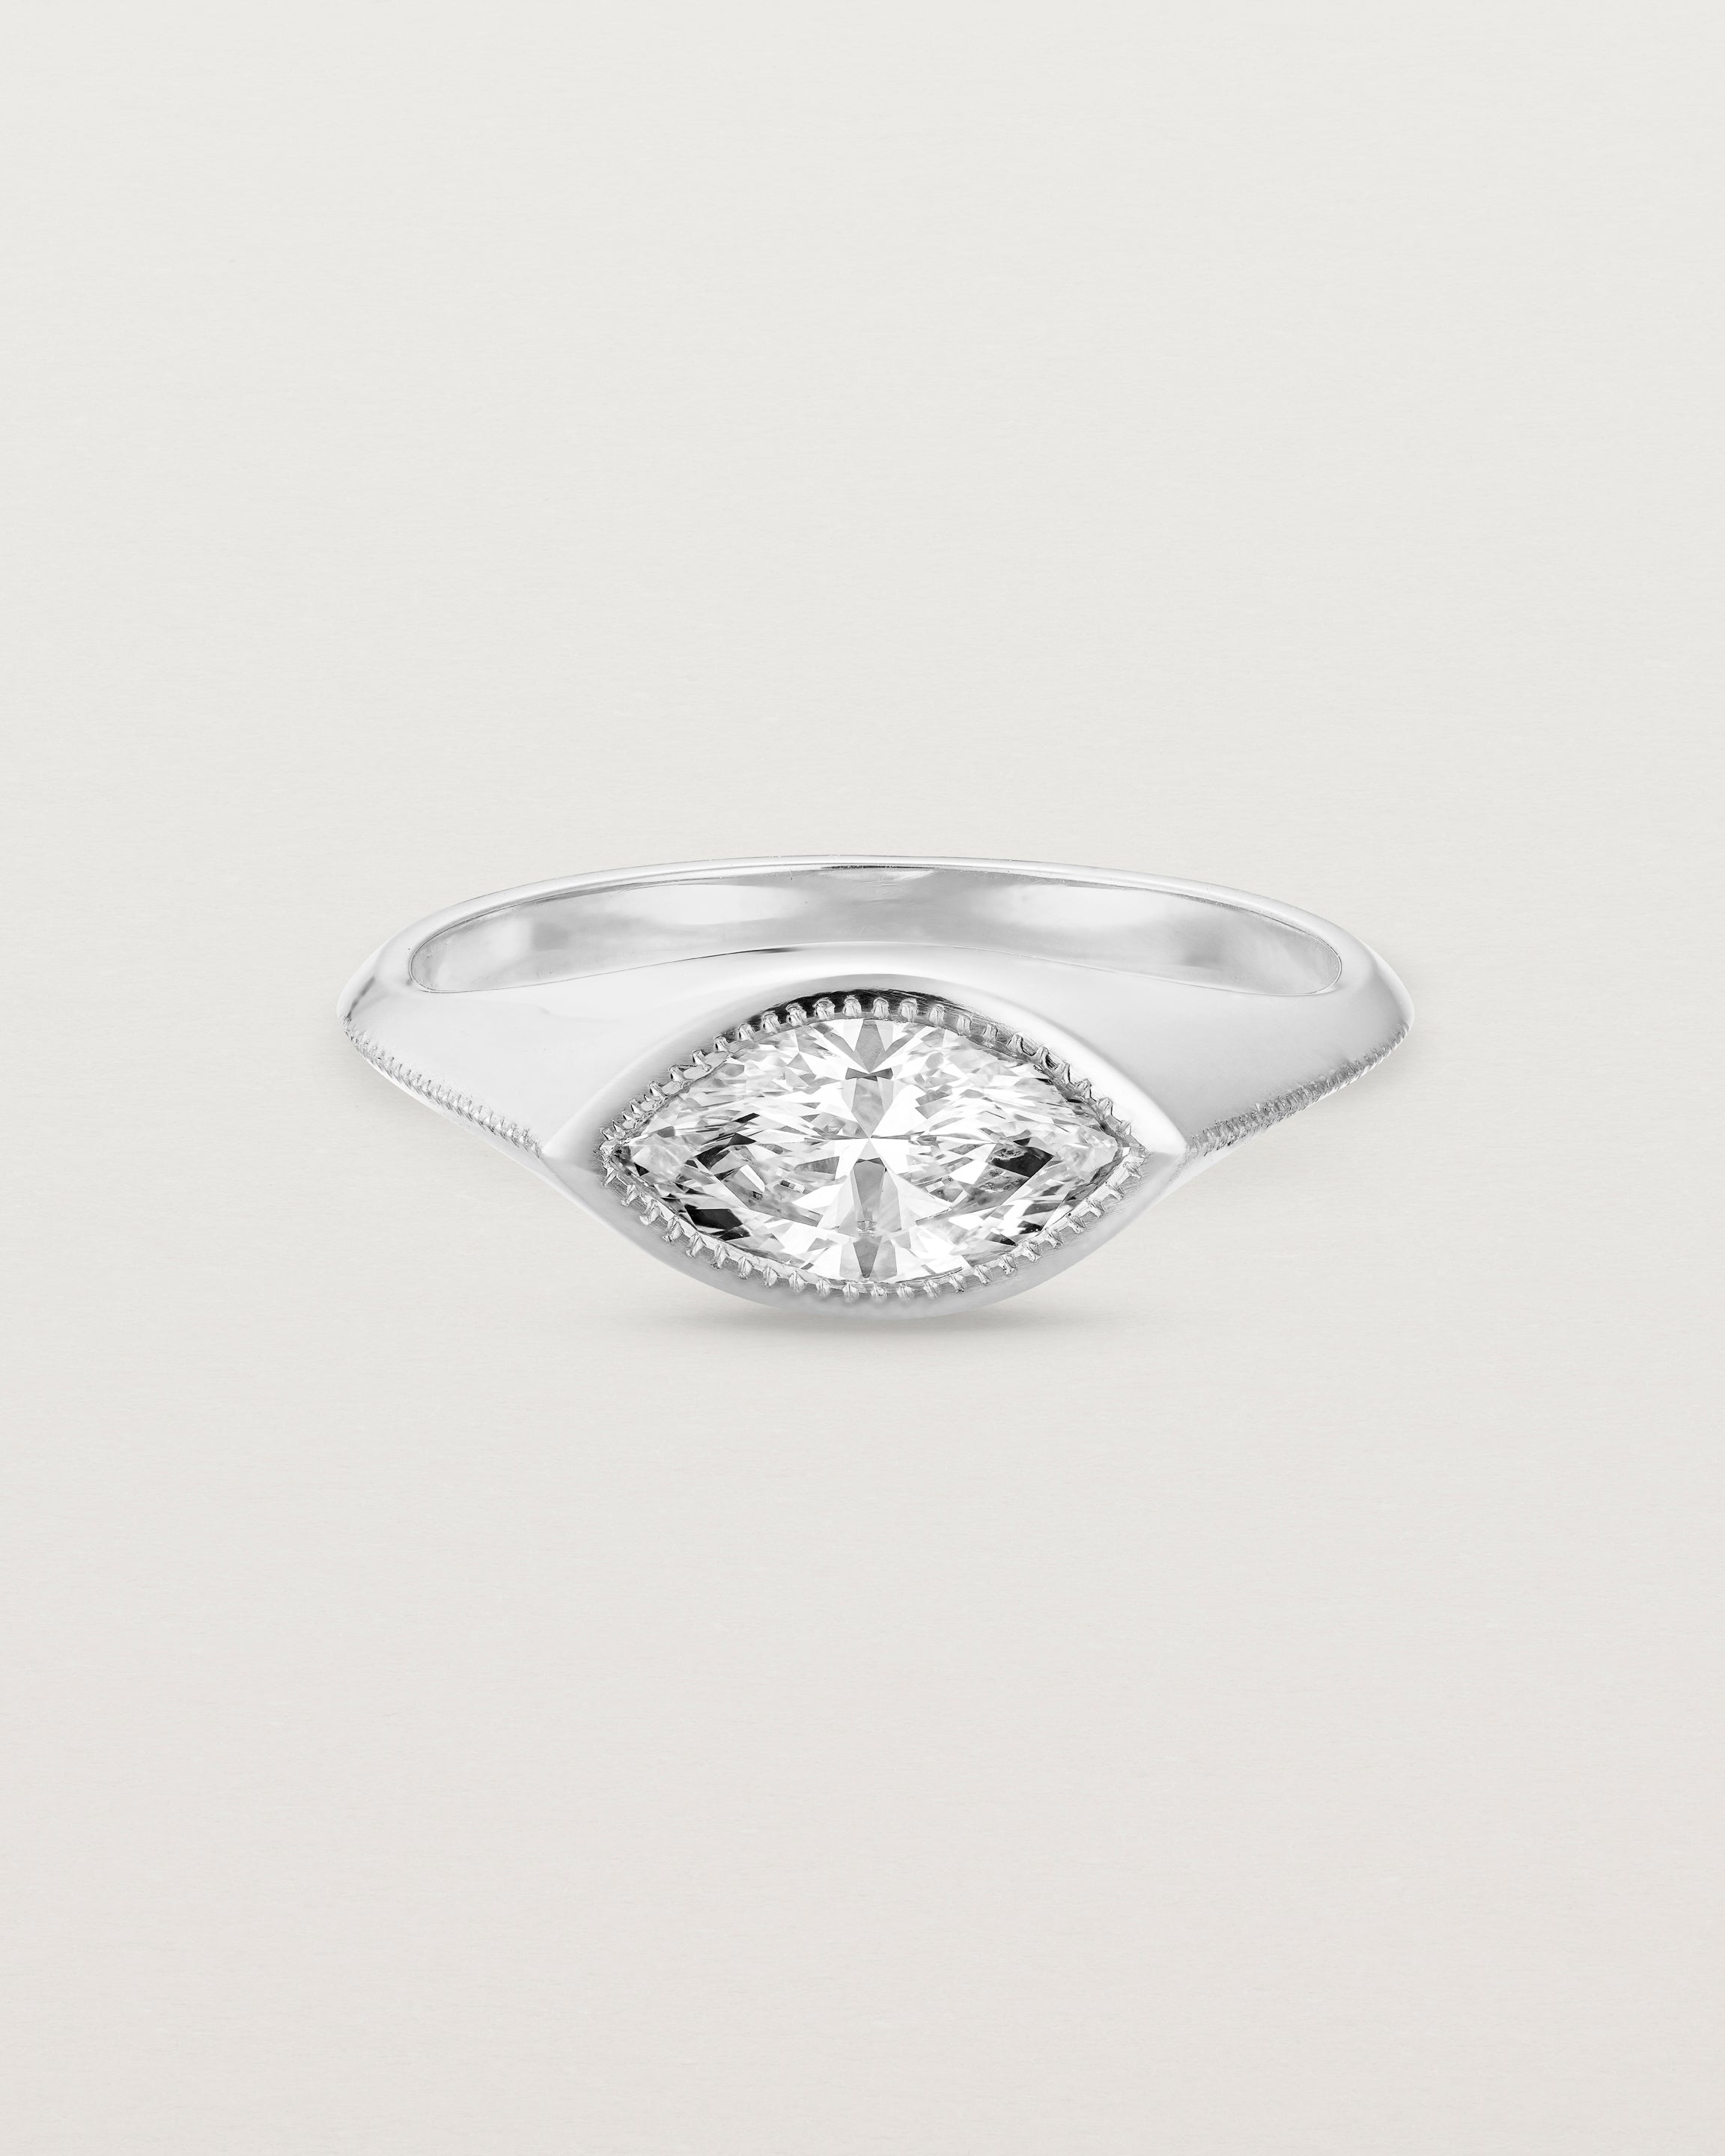 Front view of the Átlas Marquise Signet | Laboratory Grown Diamond in white gold, in a polished finish. _label:Polished Finish Example